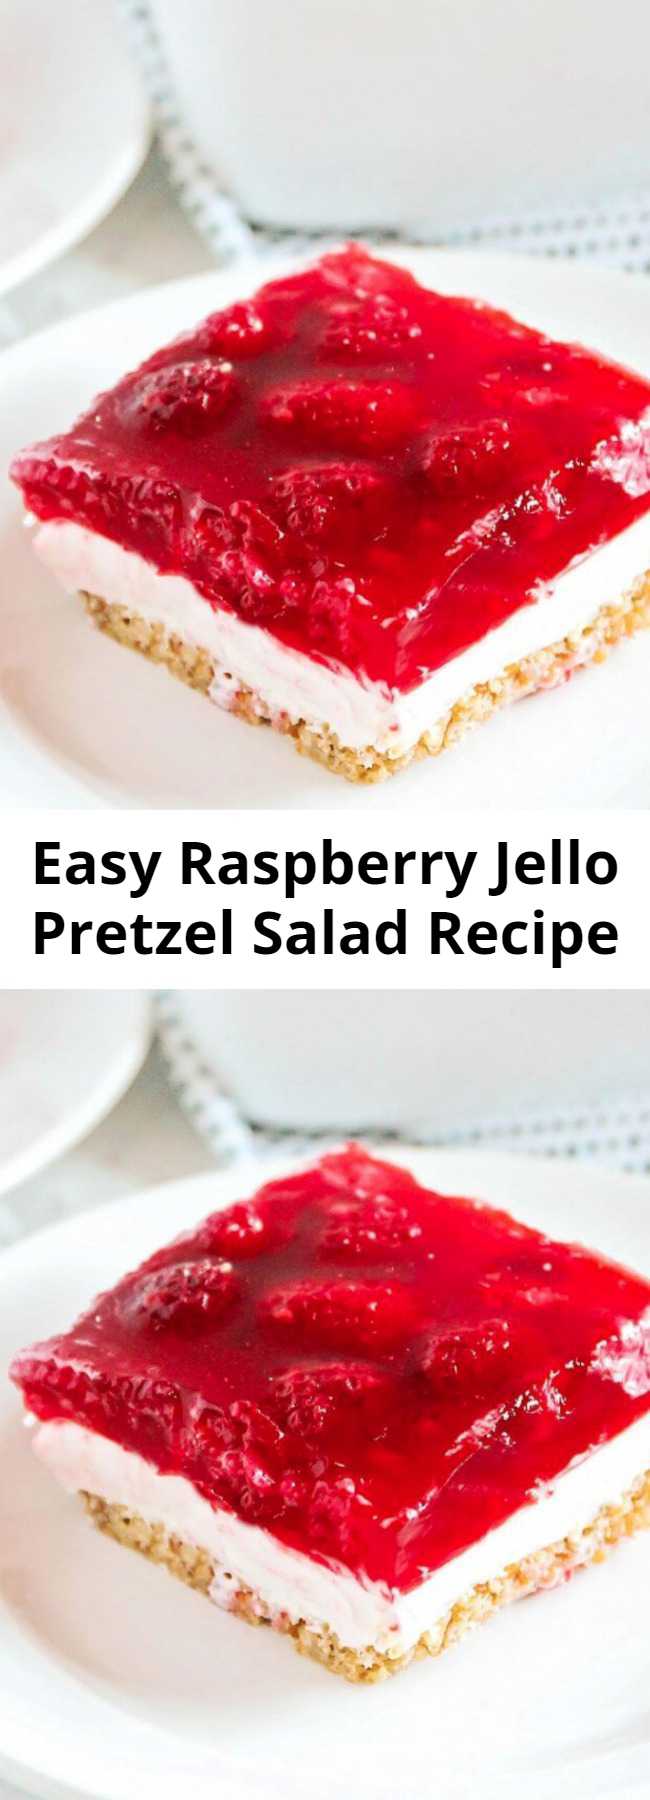 Easy Raspberry Jello Pretzel Salad Recipe - One of my favorite jello salad recipes! The cream cheese mixture and salted pretzel crust mixed with the raspberry jello is the perfect combo. A little sweet, a little salty and a LOT of deliciousness! #berries #jello #creamcheese #cheesecake #pretzels #thanksgiving #christmas #dessert #holidaydessert